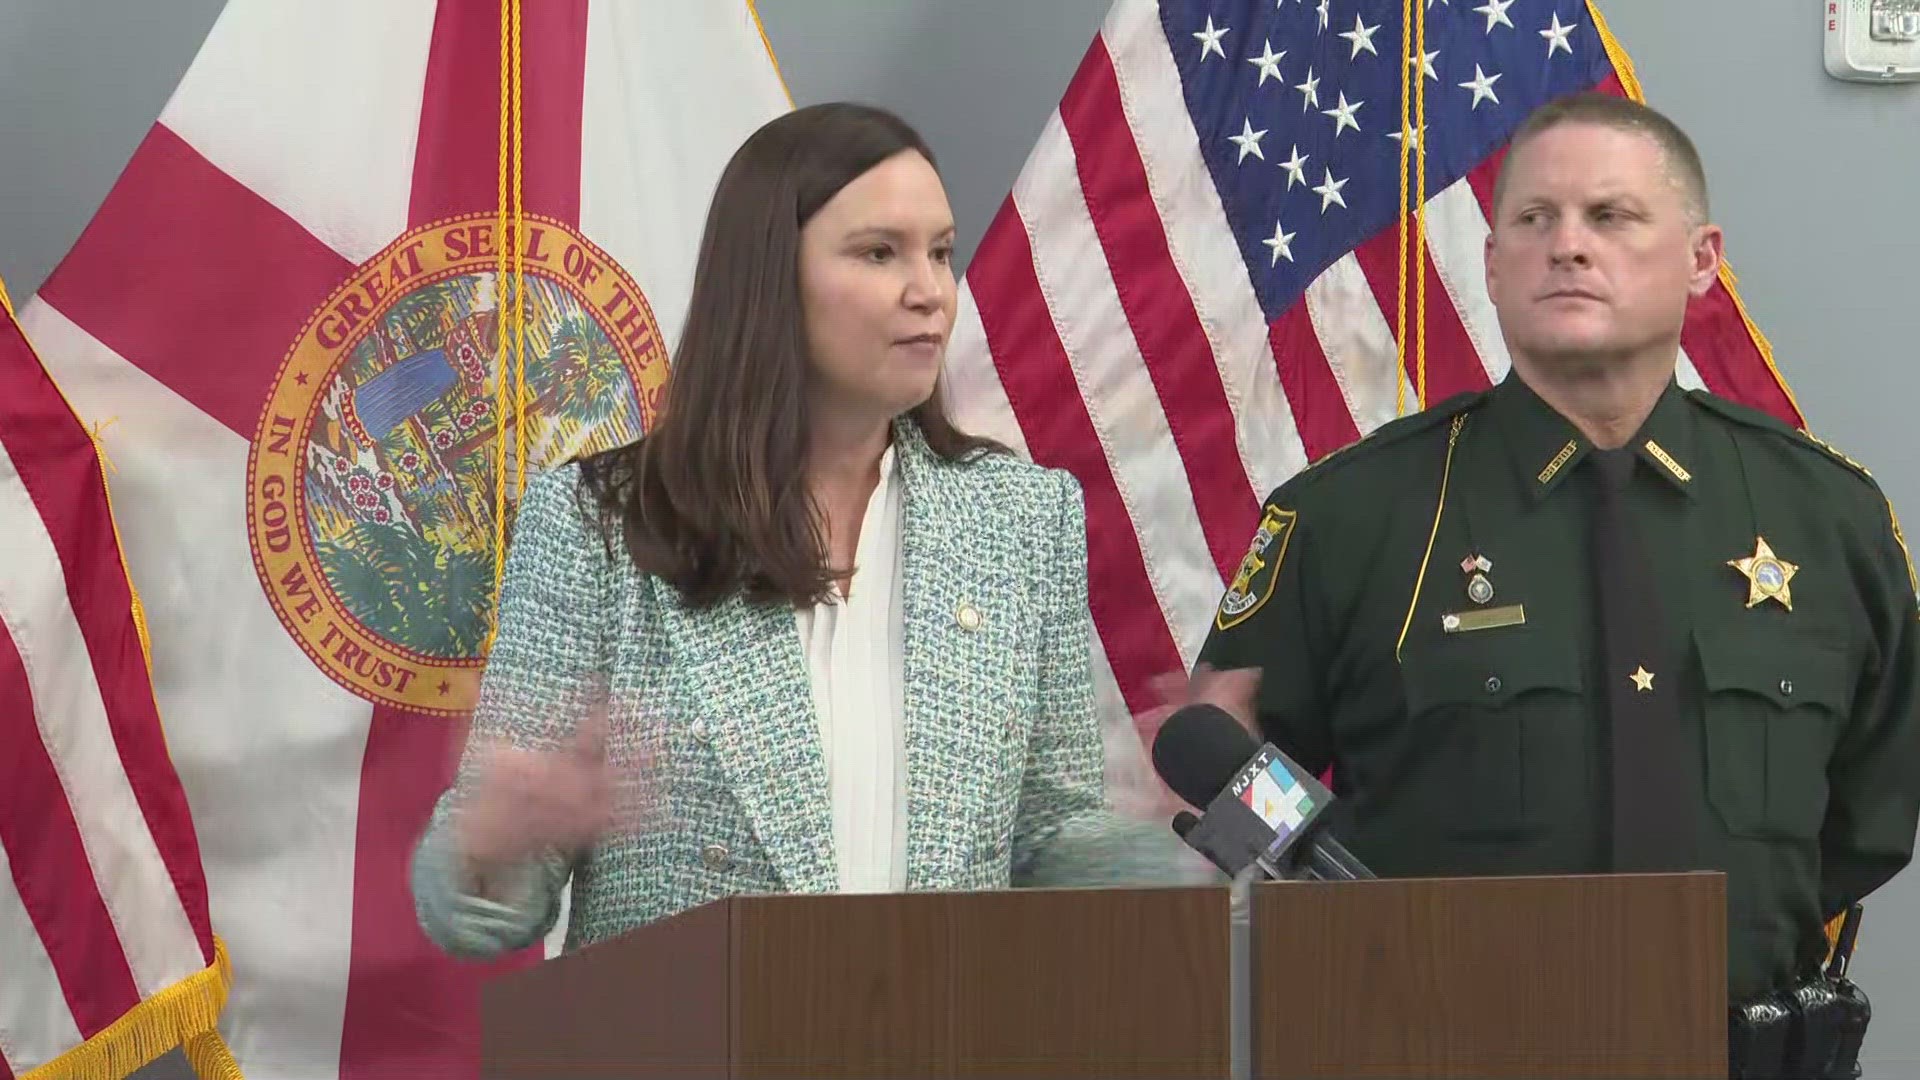 The St. Johns County Sheriff's Office is partnering with the Florida Attorney General's Office to help protect seniors in Northeast Florida from exploitation.